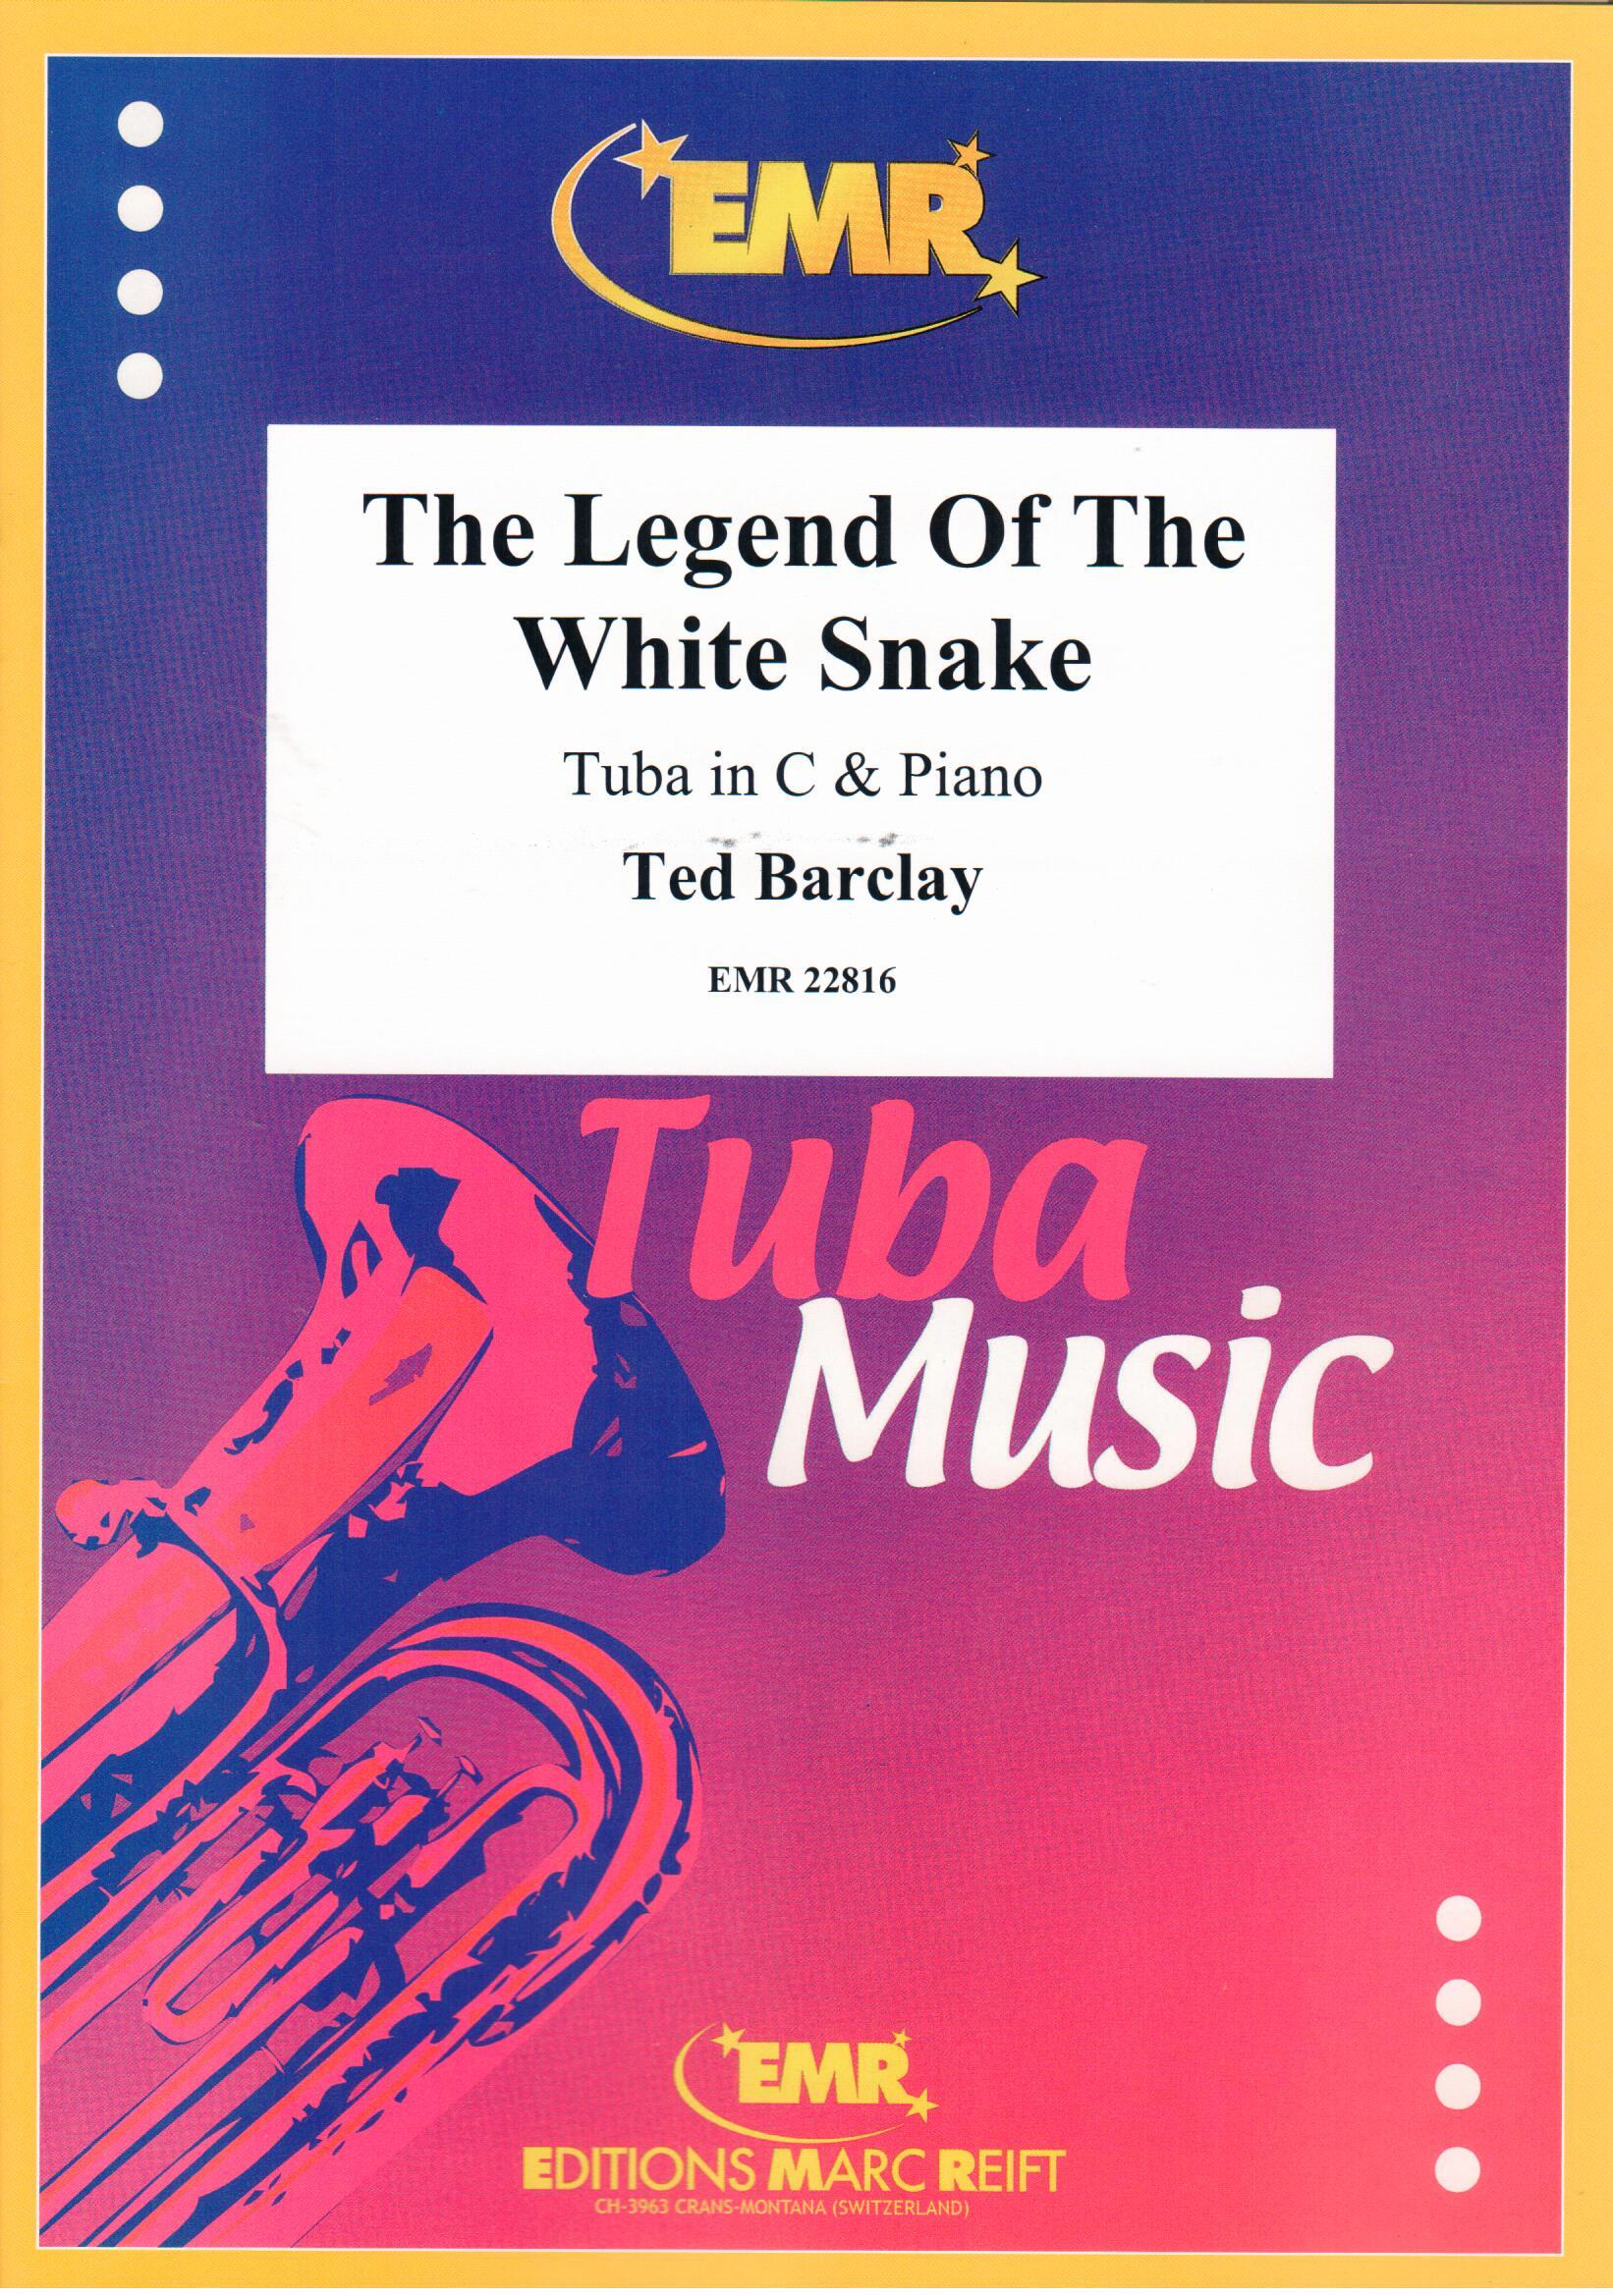 THE LEGEND OF THE WHITE SNAKE, SOLOS - E♭. Bass